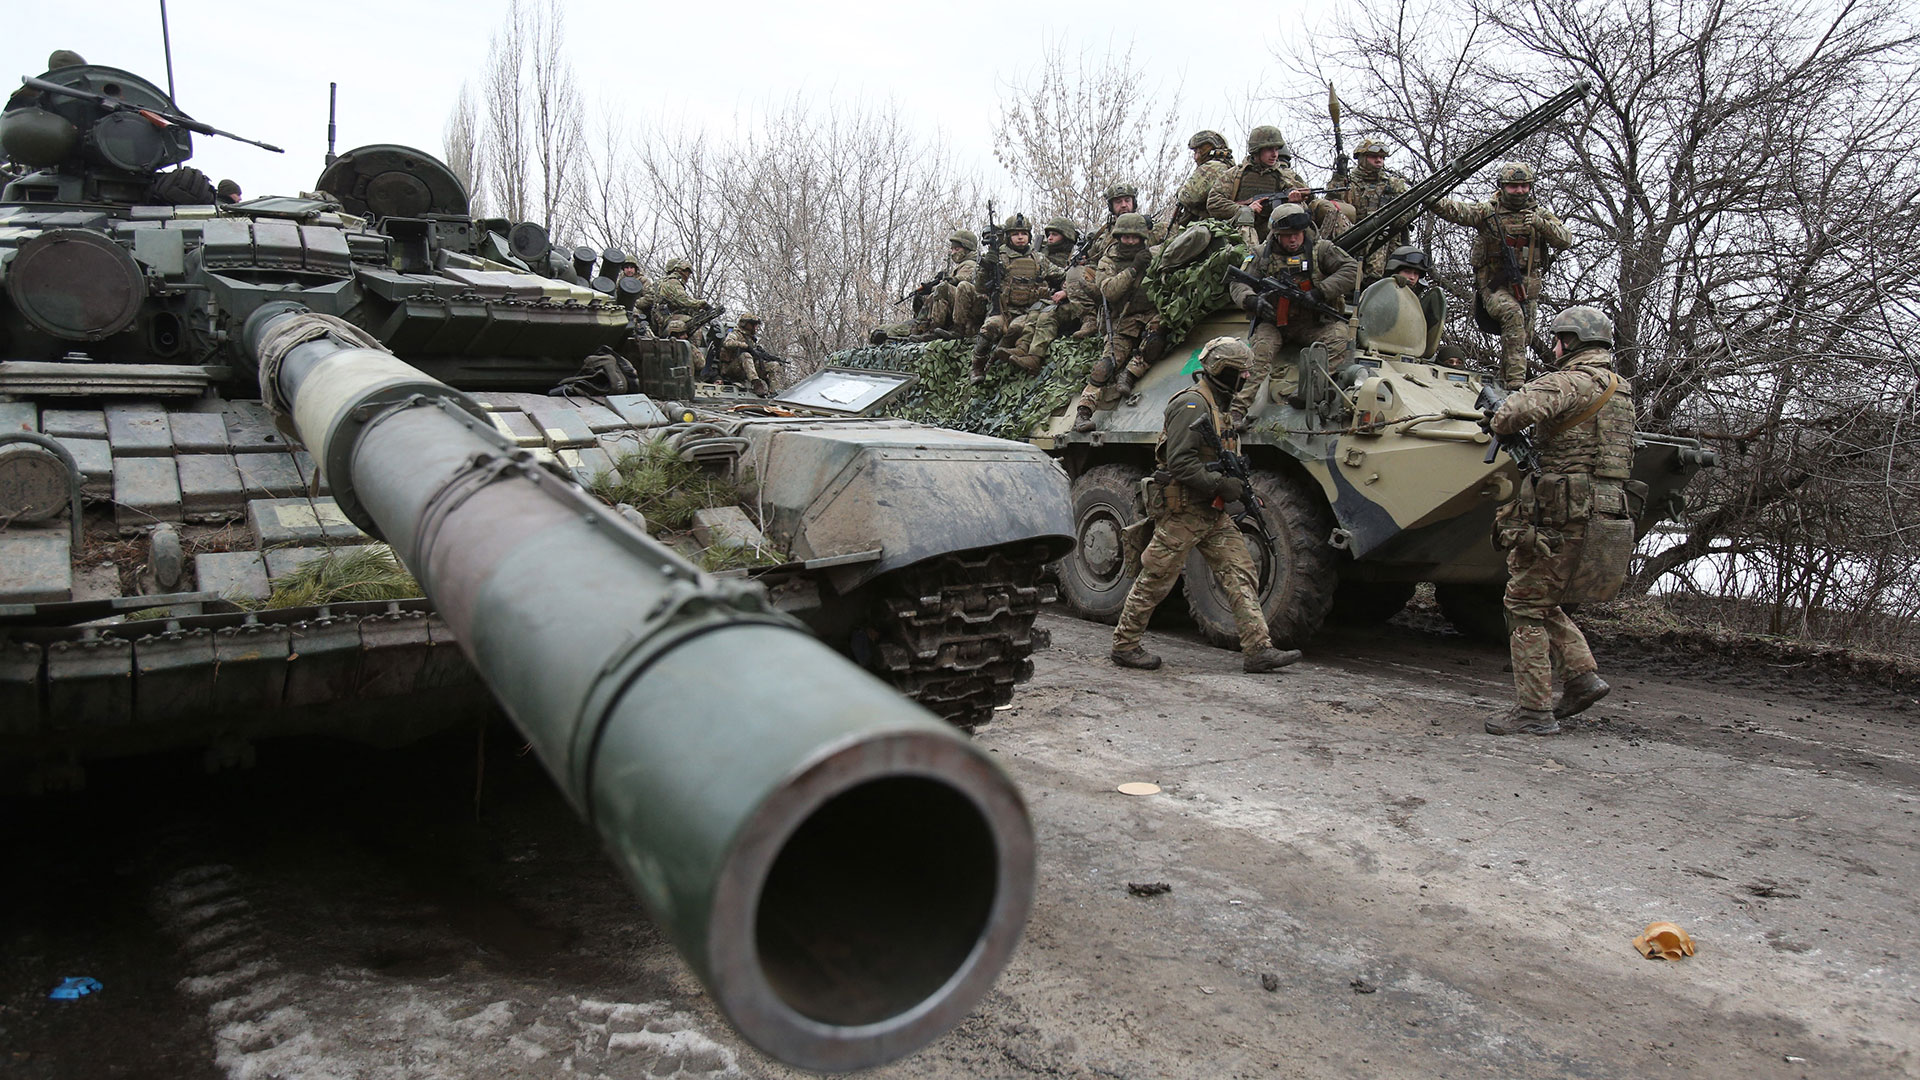 Russian troops have intensified their attacks on the city of Severodonetsk in the Luhansk region